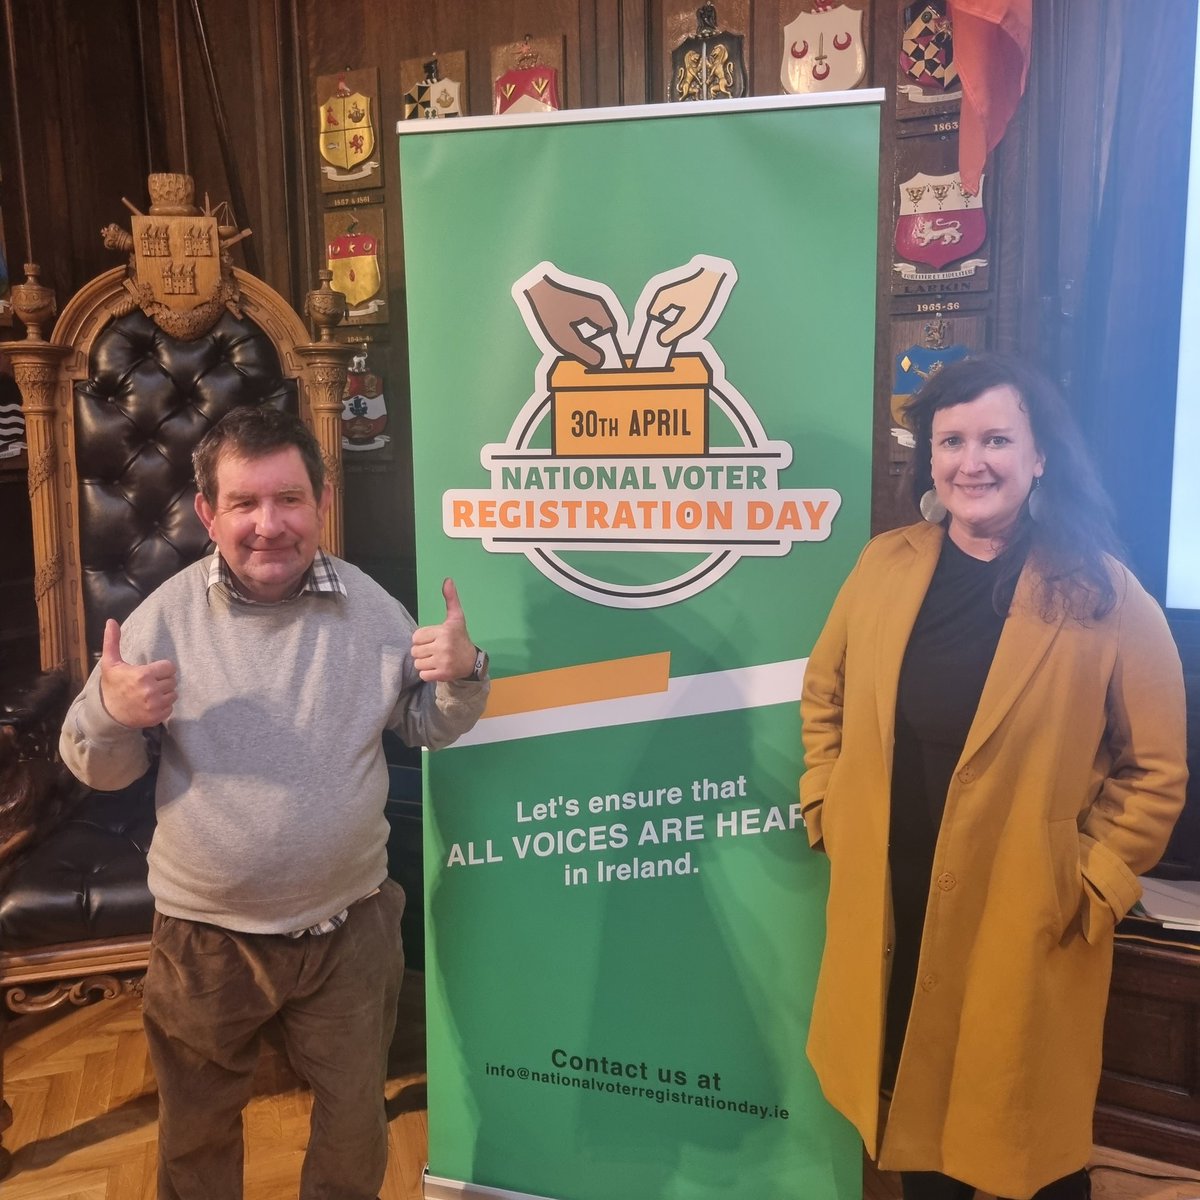 Delighted to be at the launch of the national voter registration day at the Mansion House. Paul will talk about the barriers people with intellectual disabilities face in using their vote and the solutions ; accessible information and training.